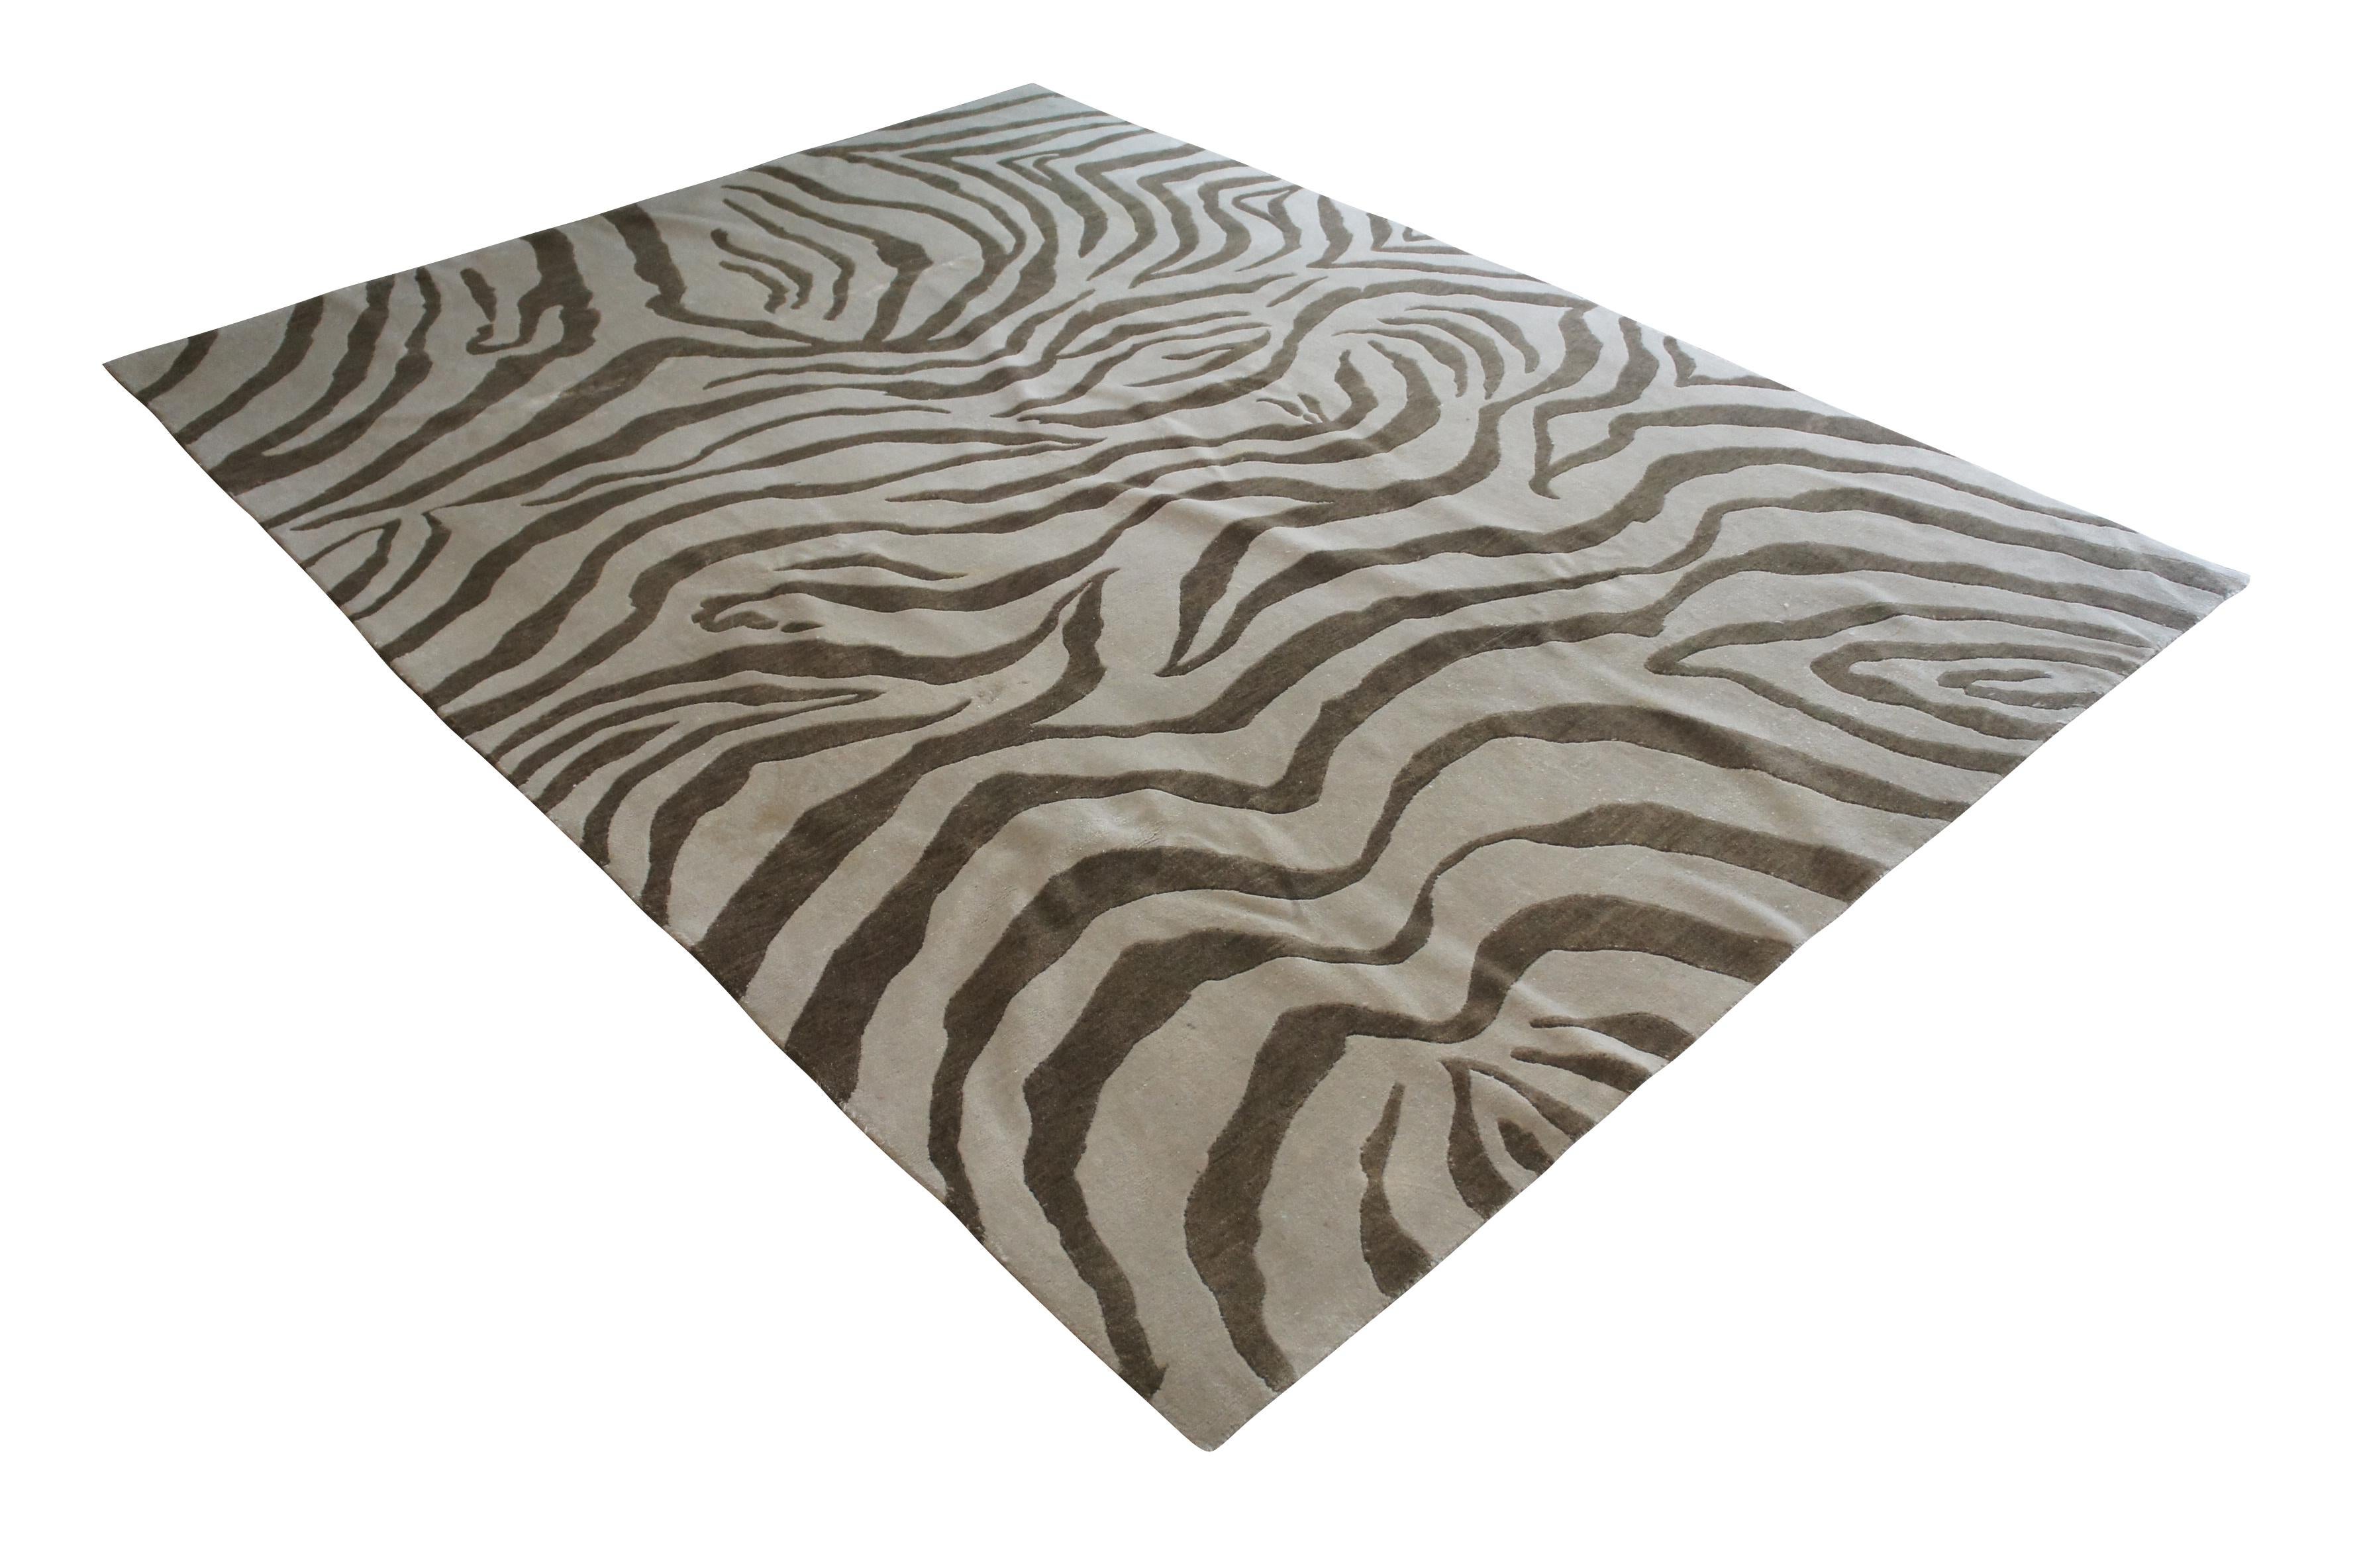 Vintage Animal Print Modern Brown & Beige Zebra Are Rug Carpet 8' x 11'  In Good Condition For Sale In Dayton, OH